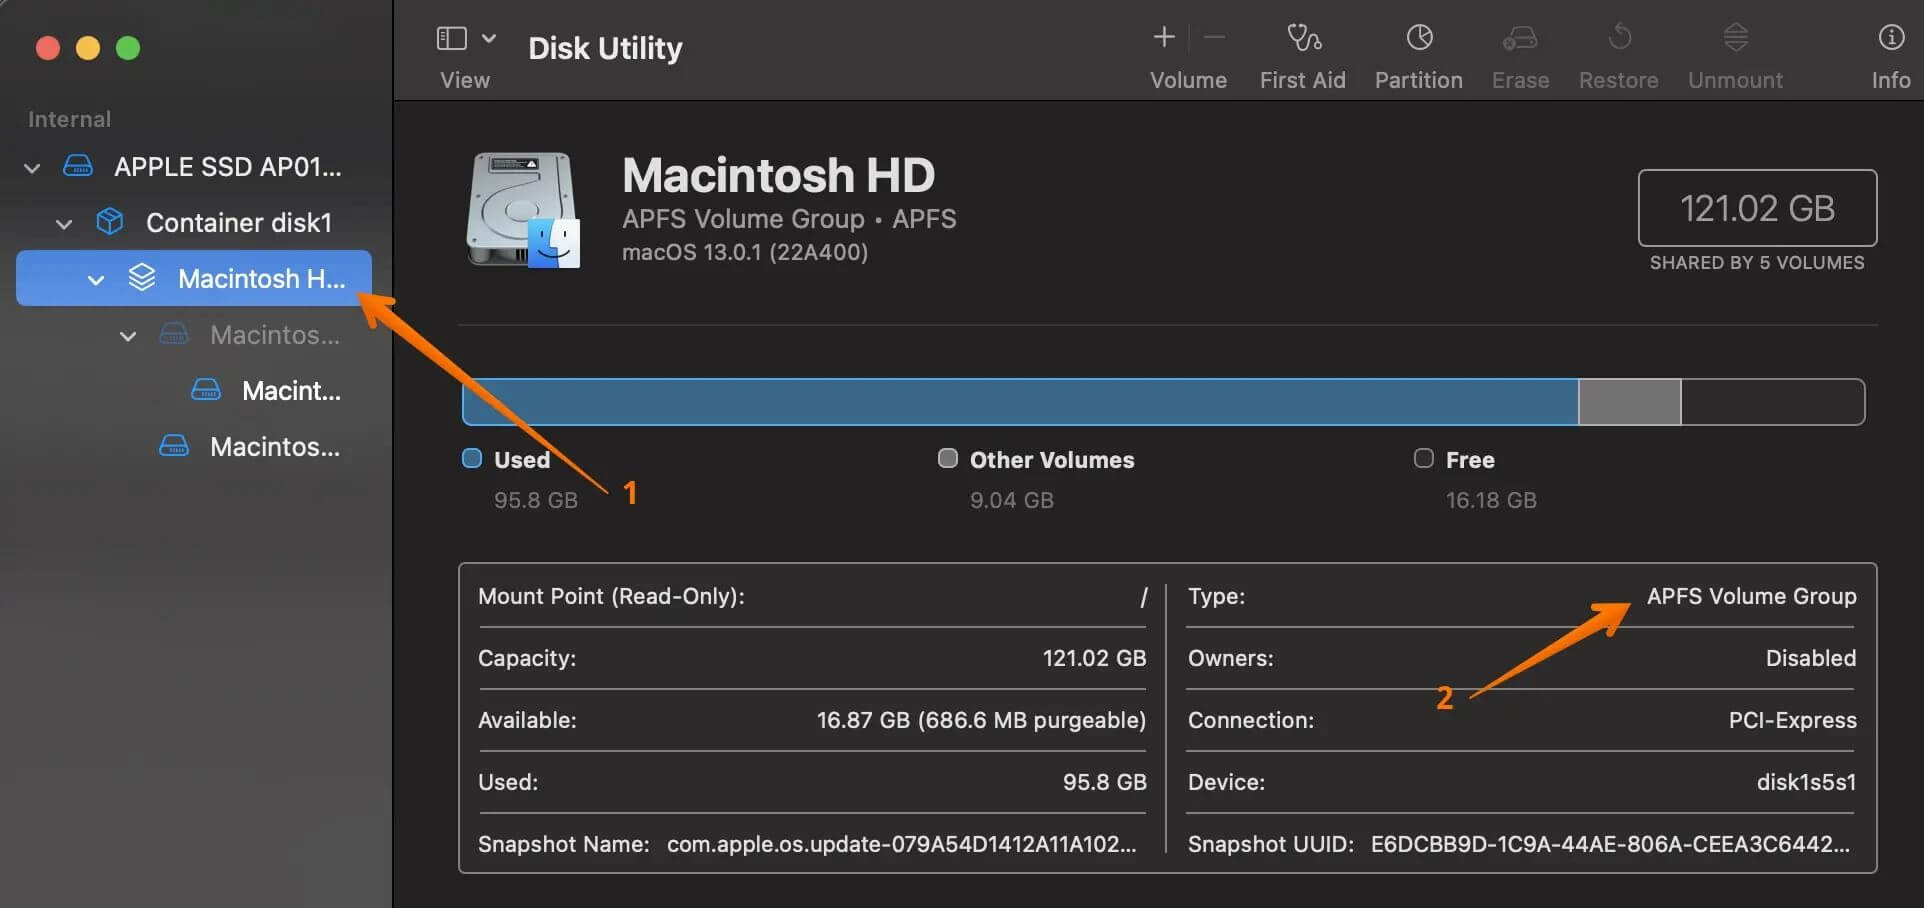 Volume Type Information on macOS Disk Utility